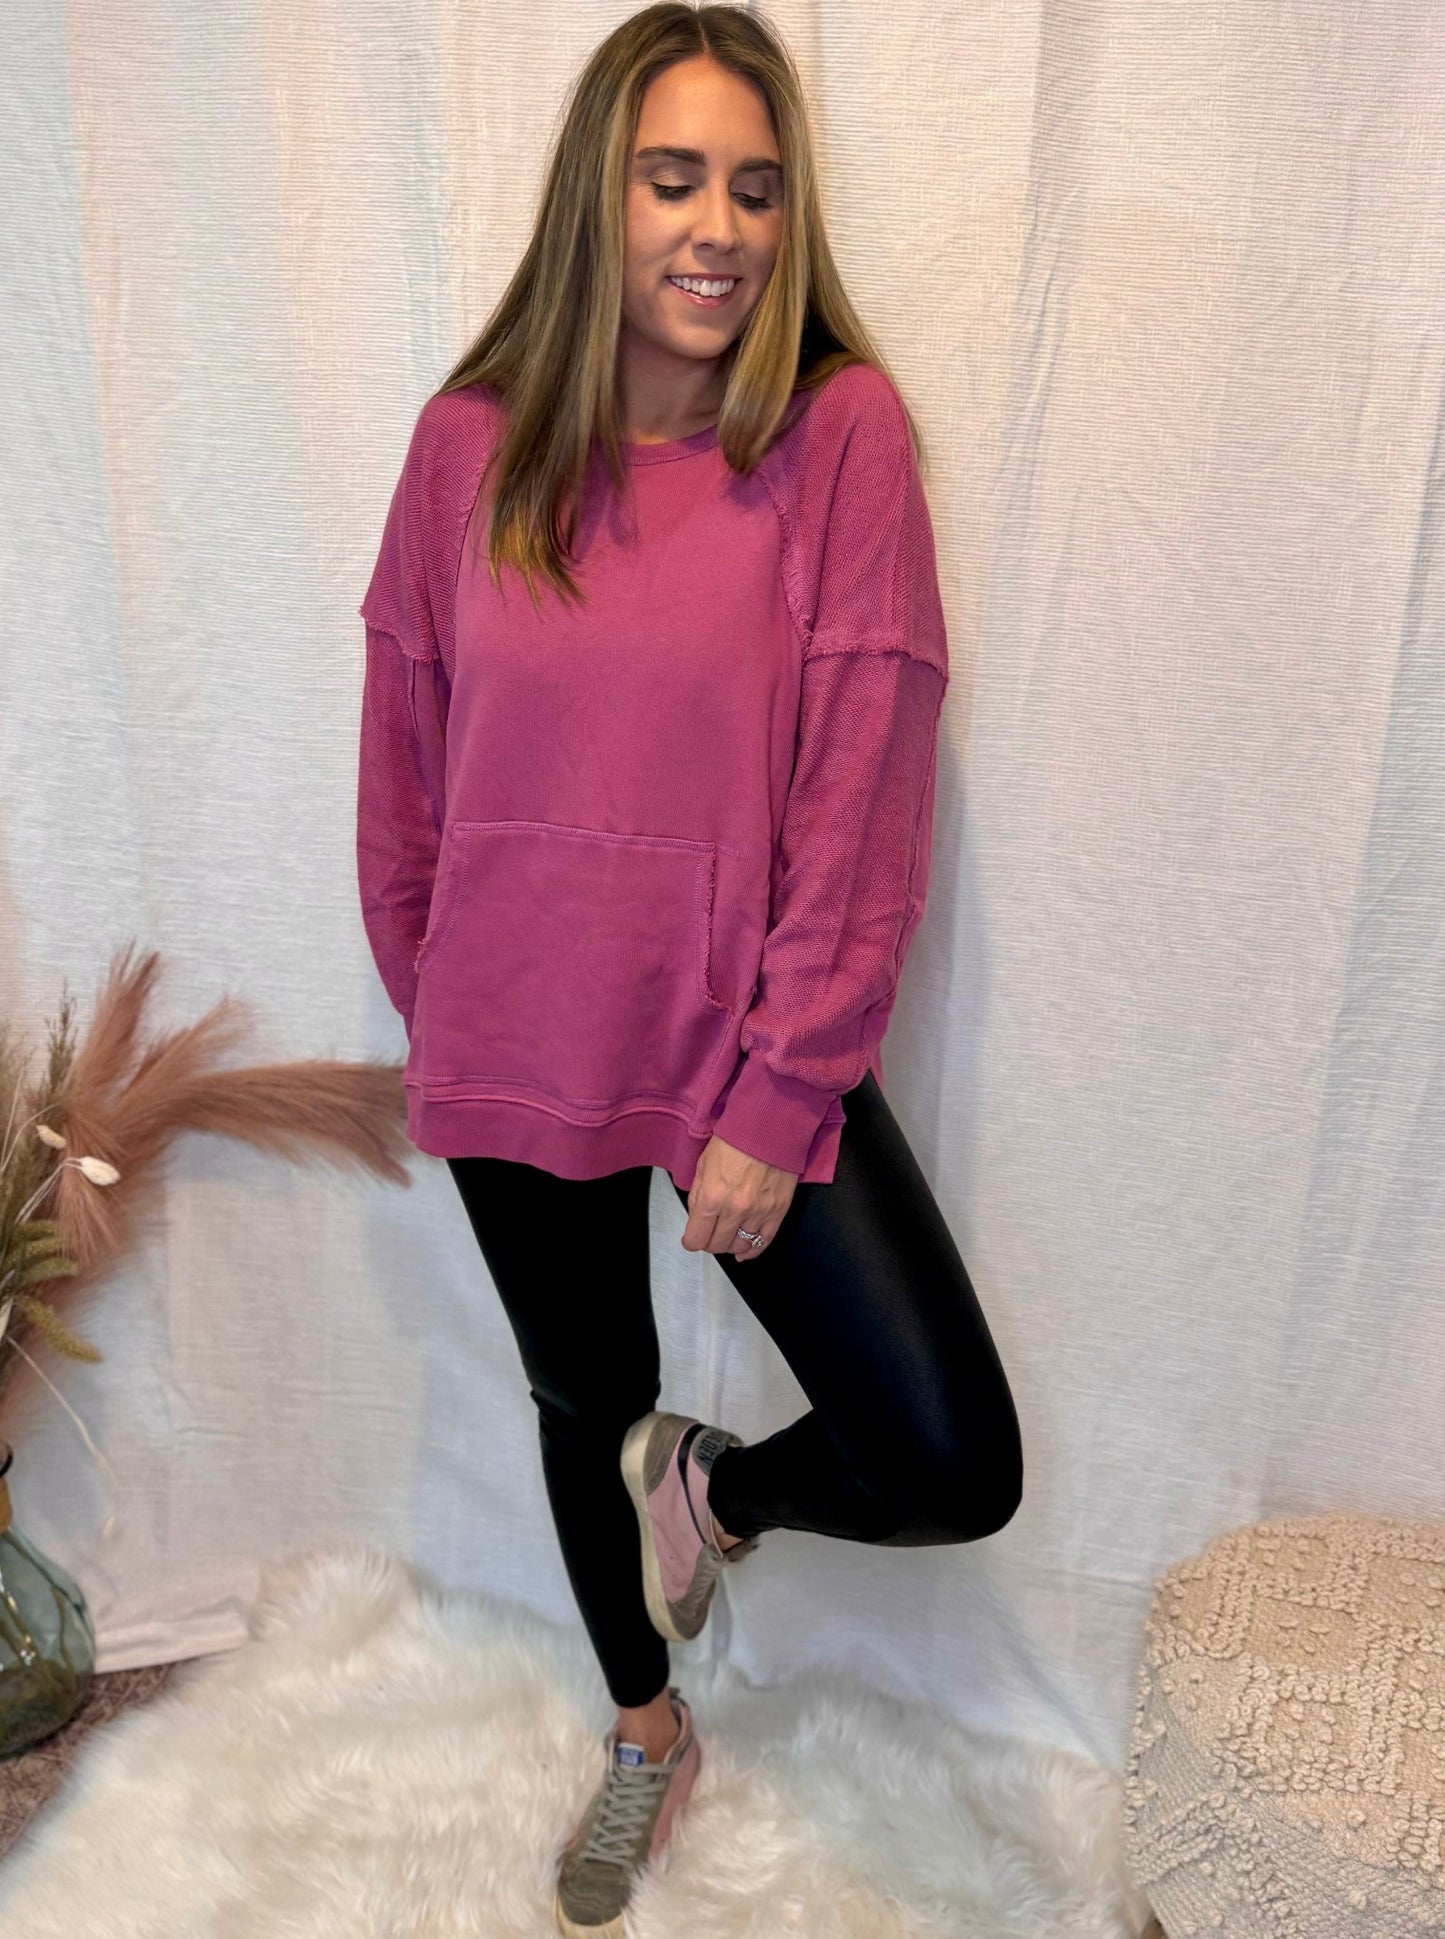 Emily Mulberry Oversized Pullover